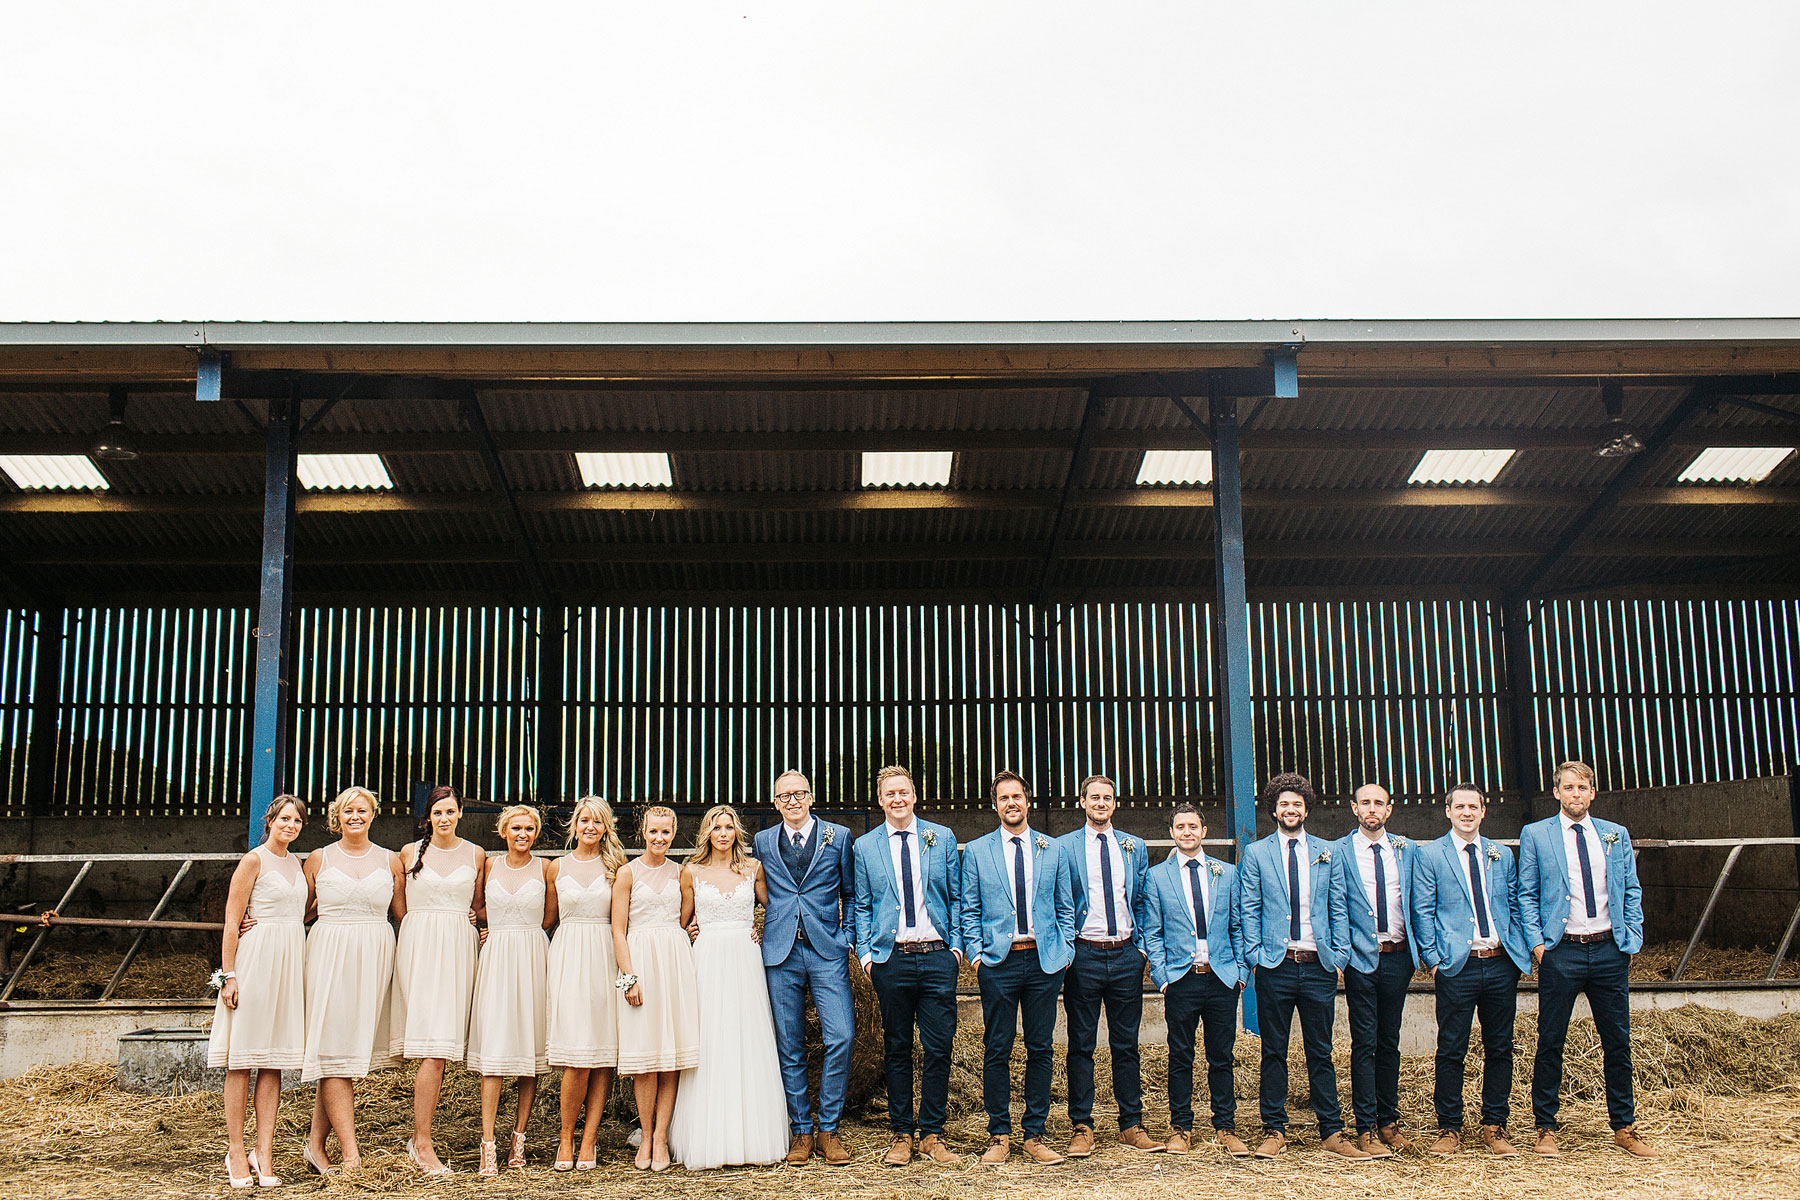 how to dress your bridesmaids and grooms men for a barn wedding